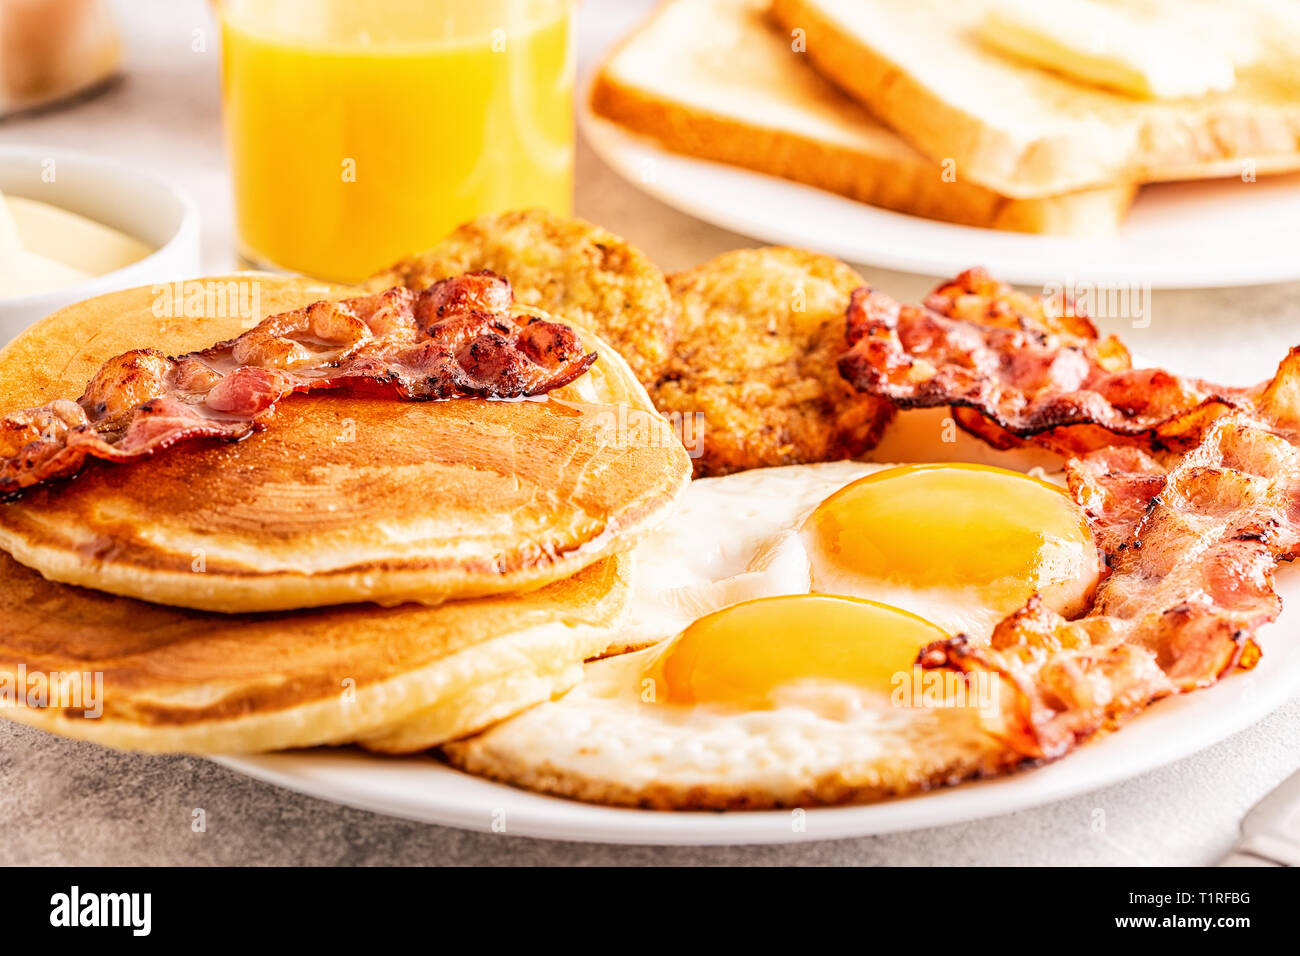 Healthy Full American Breakfast with Eggs Bacon Pancakes and Latkes, selective focus. Stock Photo